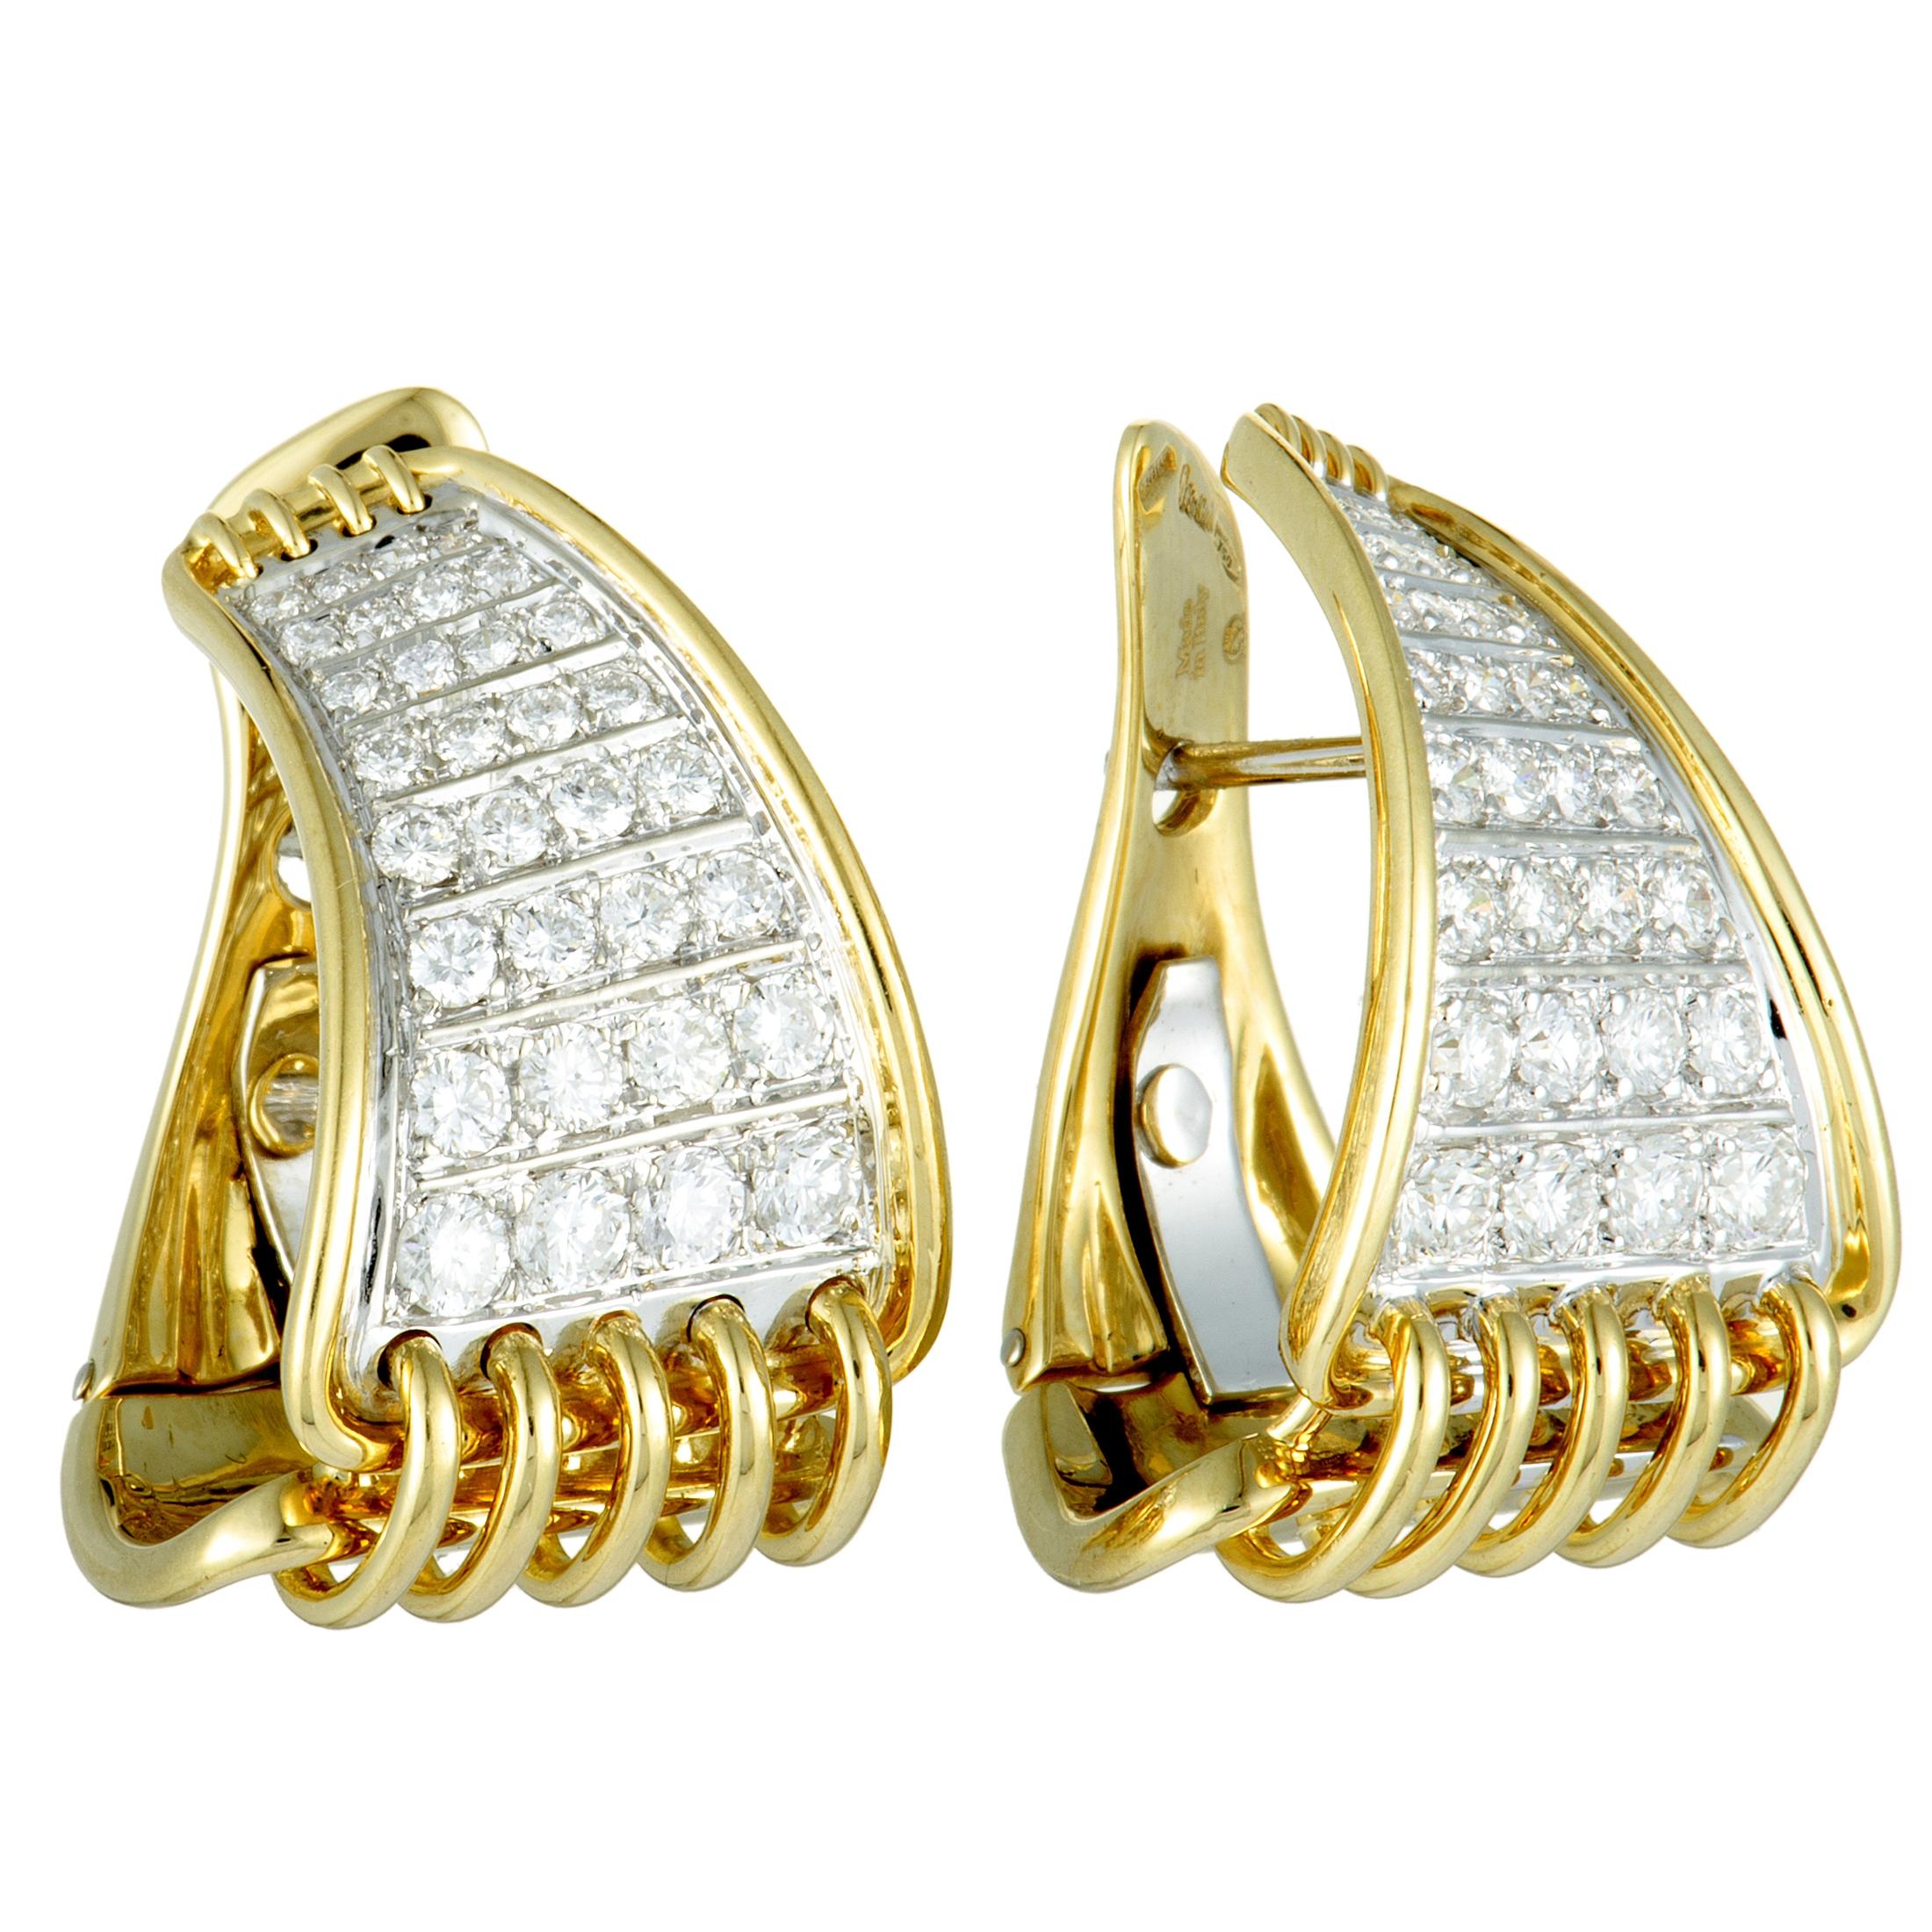 Embellish your ensembles in a distinctly classy fashion with these delightful earrings that feature an exceptionally refined design topped off with a plethora of incredibly resplendent gemstones. Presented by Damiani, the pair is exquisitely made of